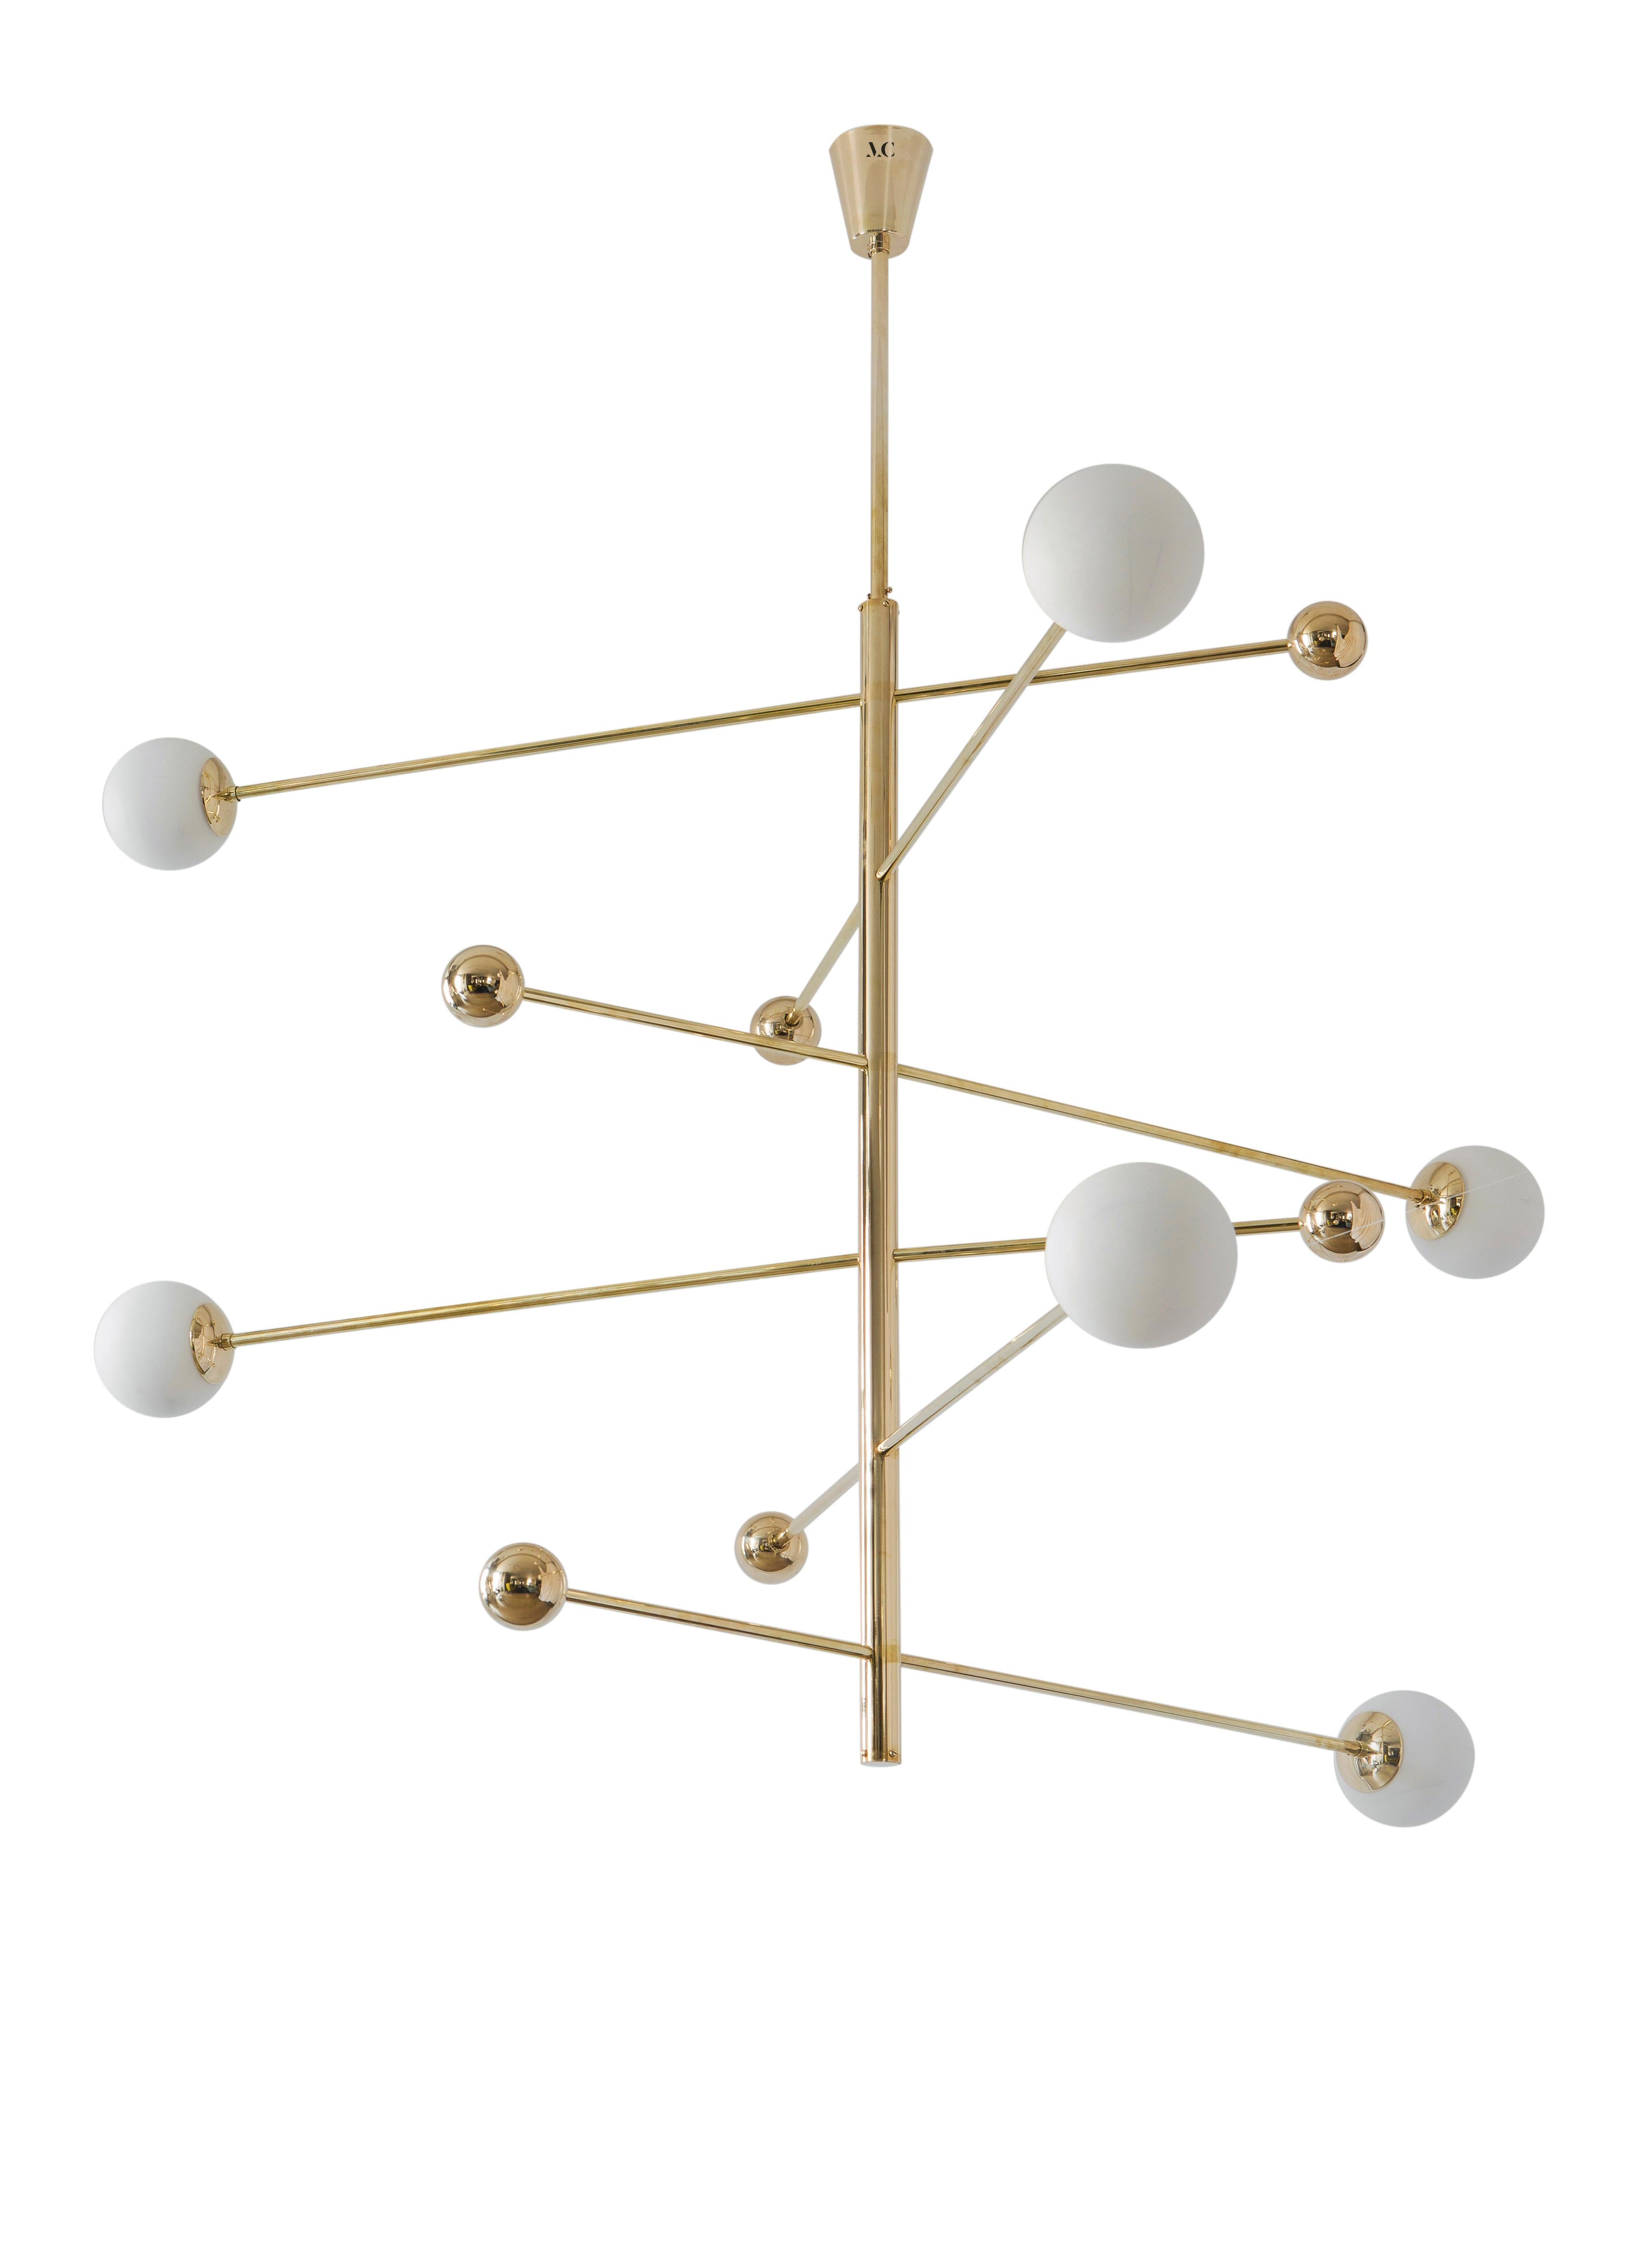 Chandelier 08 V1 by Magic Circus Editions
Dimensions: H 160 x W 156 cm
Spheres: Glass 140
 
Materials: Smooth brass, glass
Available finishes: Brass, nickel, black brass, red brick
6 × Led G9 / 5W. 220V

All our lamps can be wired according